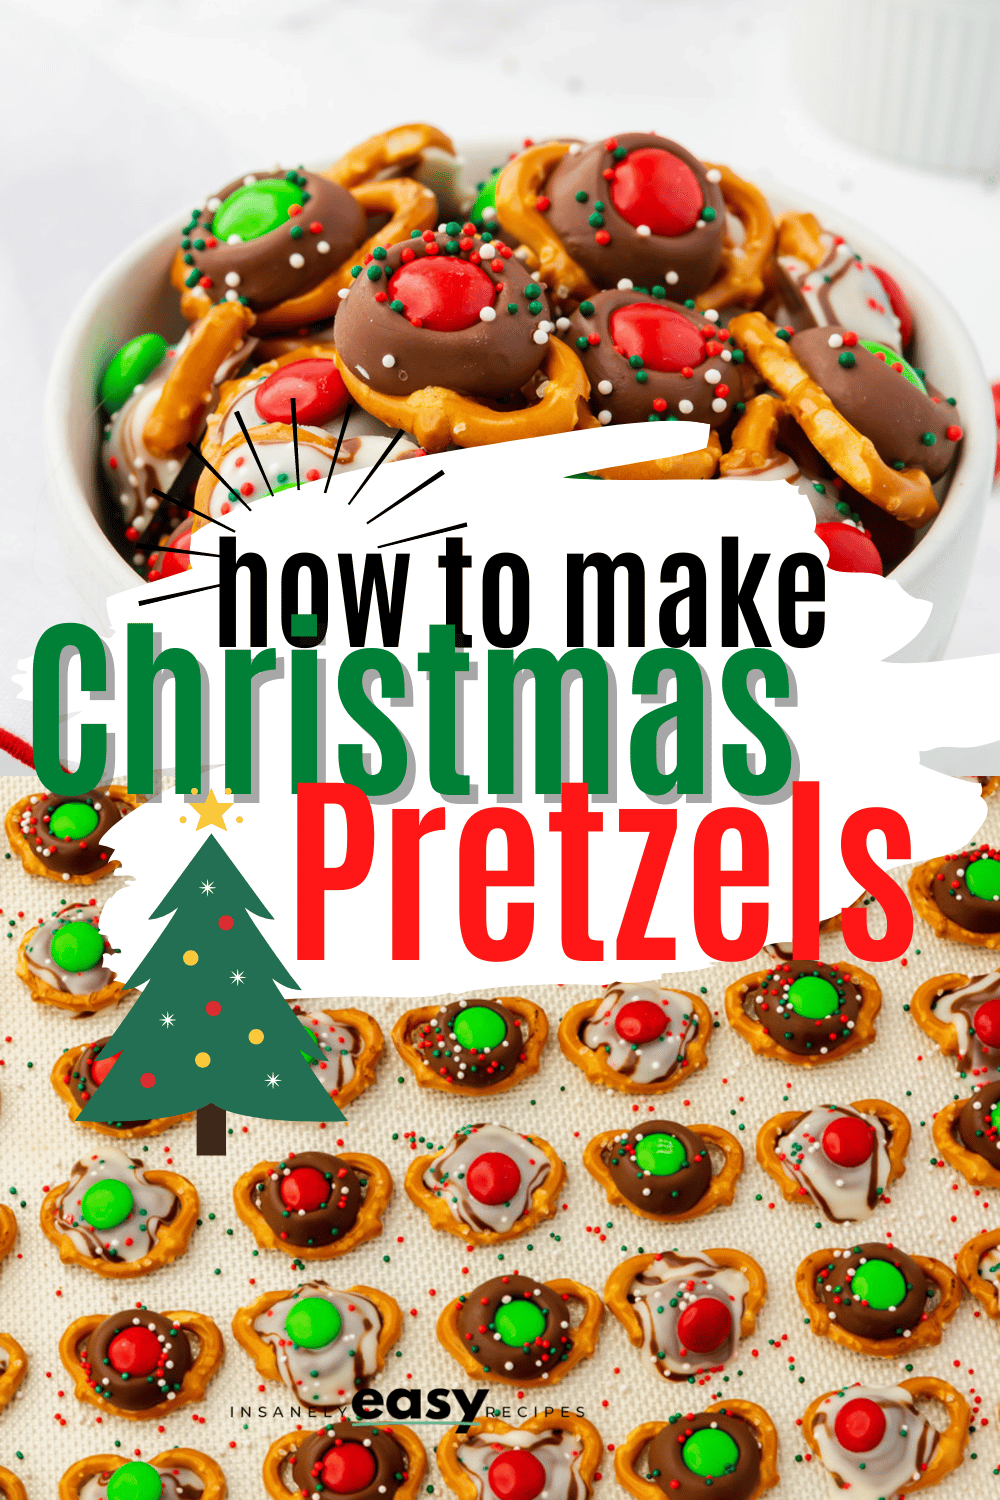 Two photos of christmas pretzel hugs topped with M&Ms, text in center says "how to make Christmas pretzels", and there is an illustration of a Christmas Tree